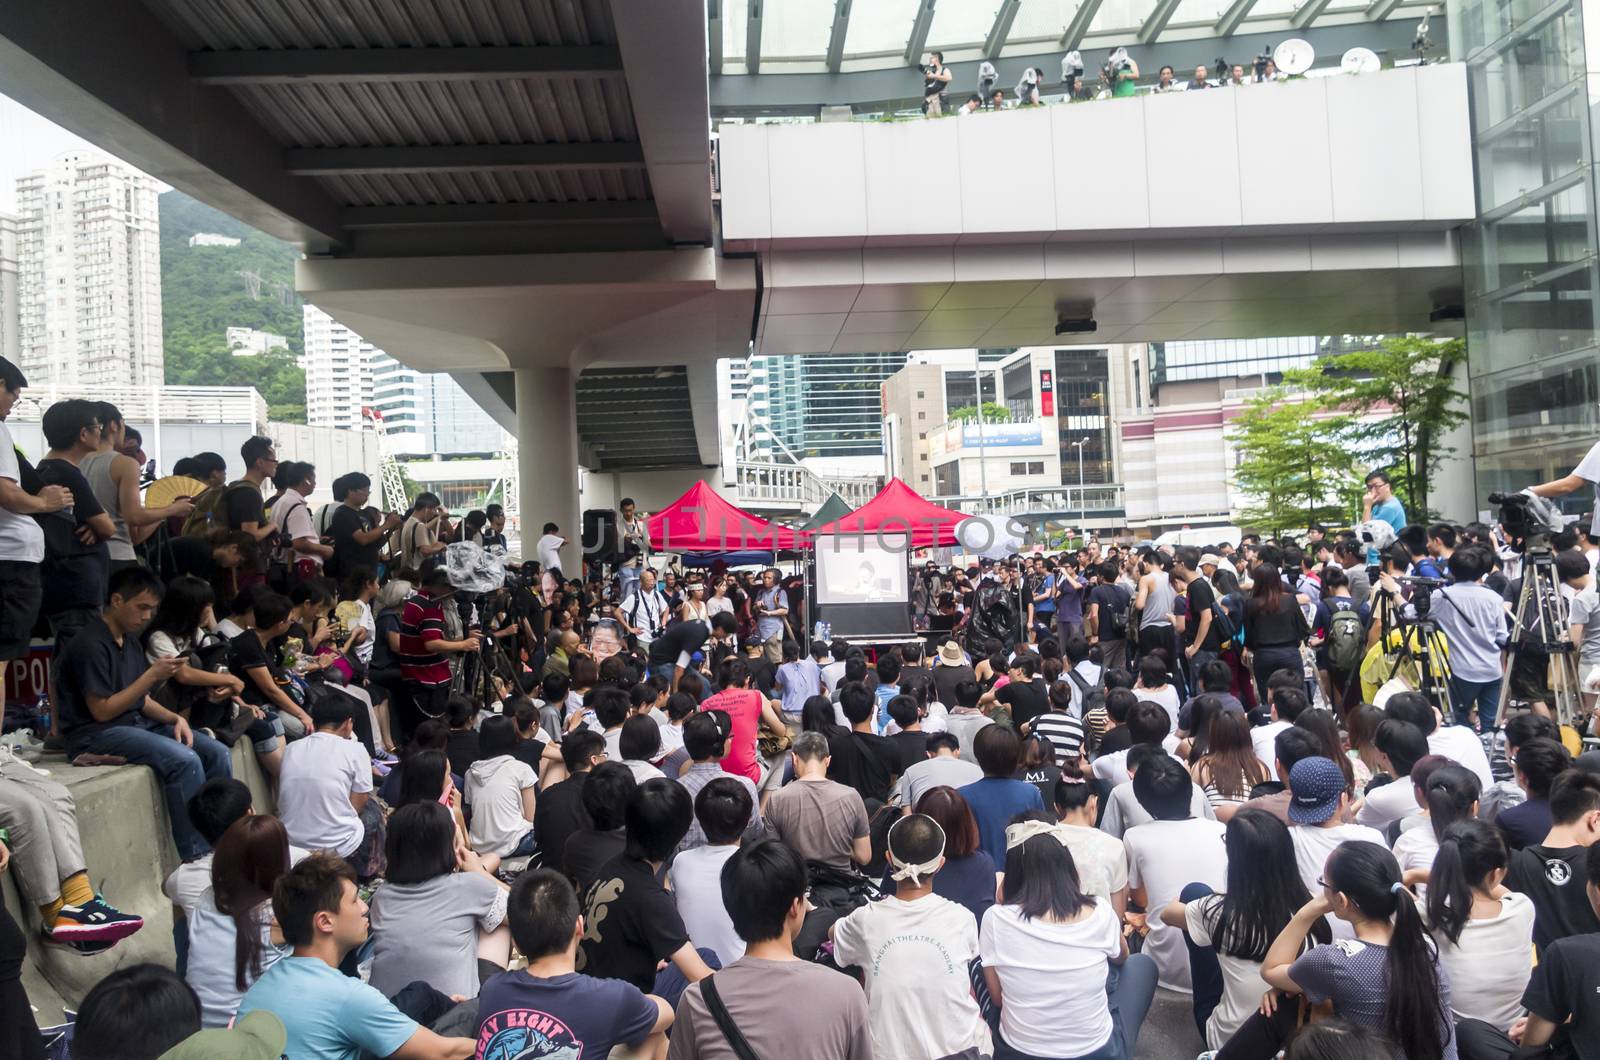 HONG KONG - JUNE 20: Protesters gathered outside the government headquarters on June 20, 2014 in Hong Kong. The Finance Committee is vetting a funding request about northeast New Territories.